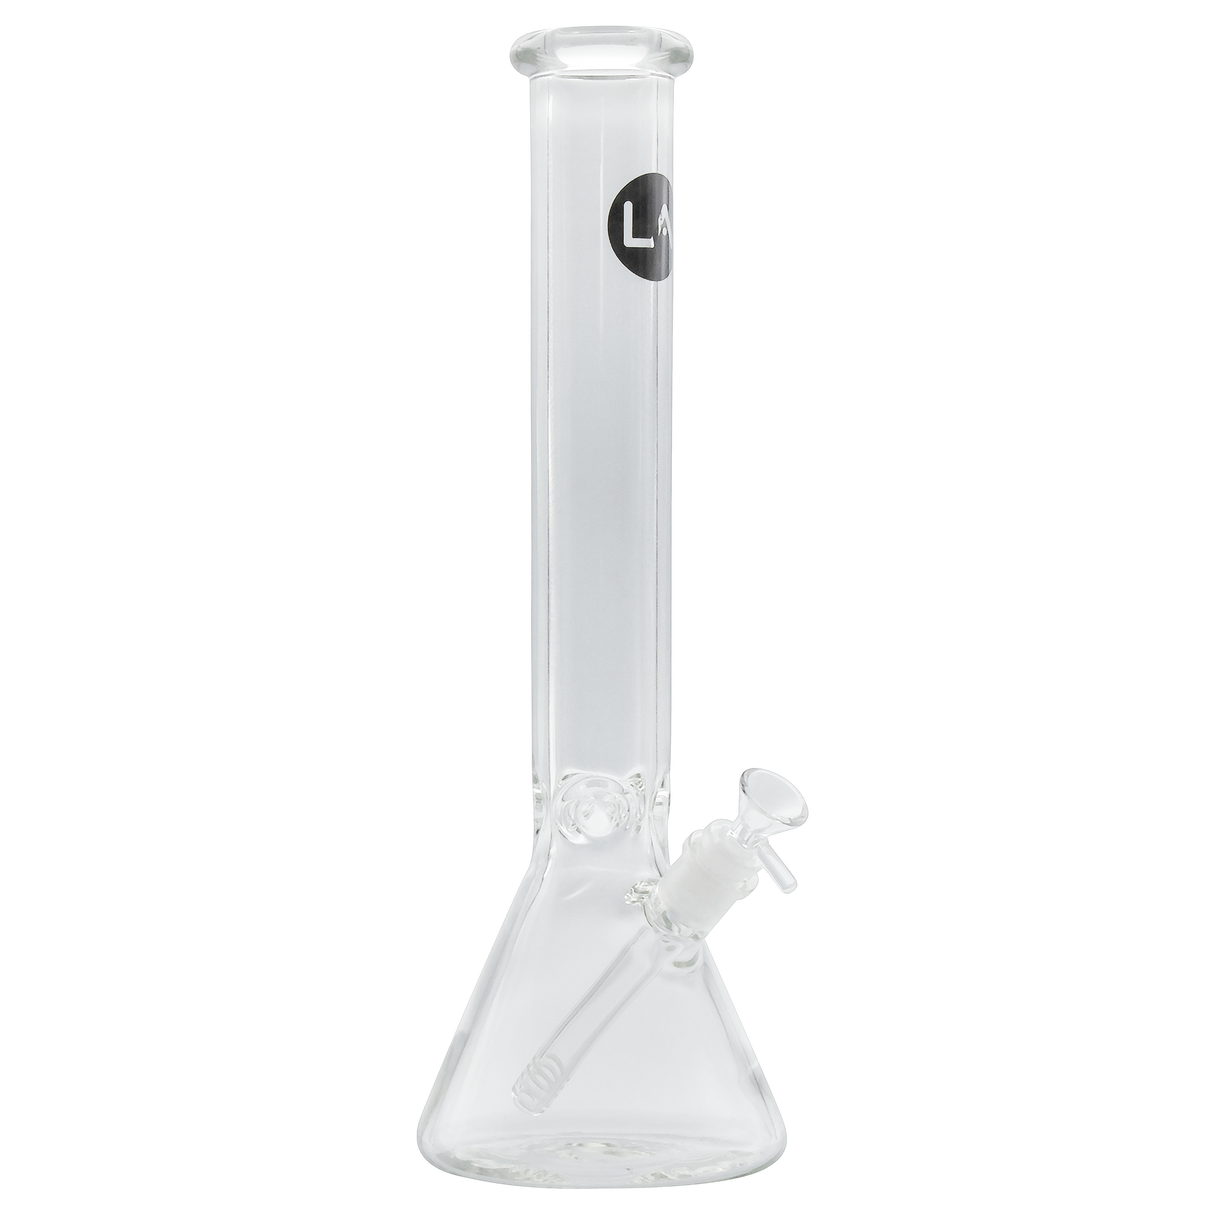 LA Pipes "Thicc Boy" 9mm Thick Beaker Bong, 16" Height, Front View on White Background